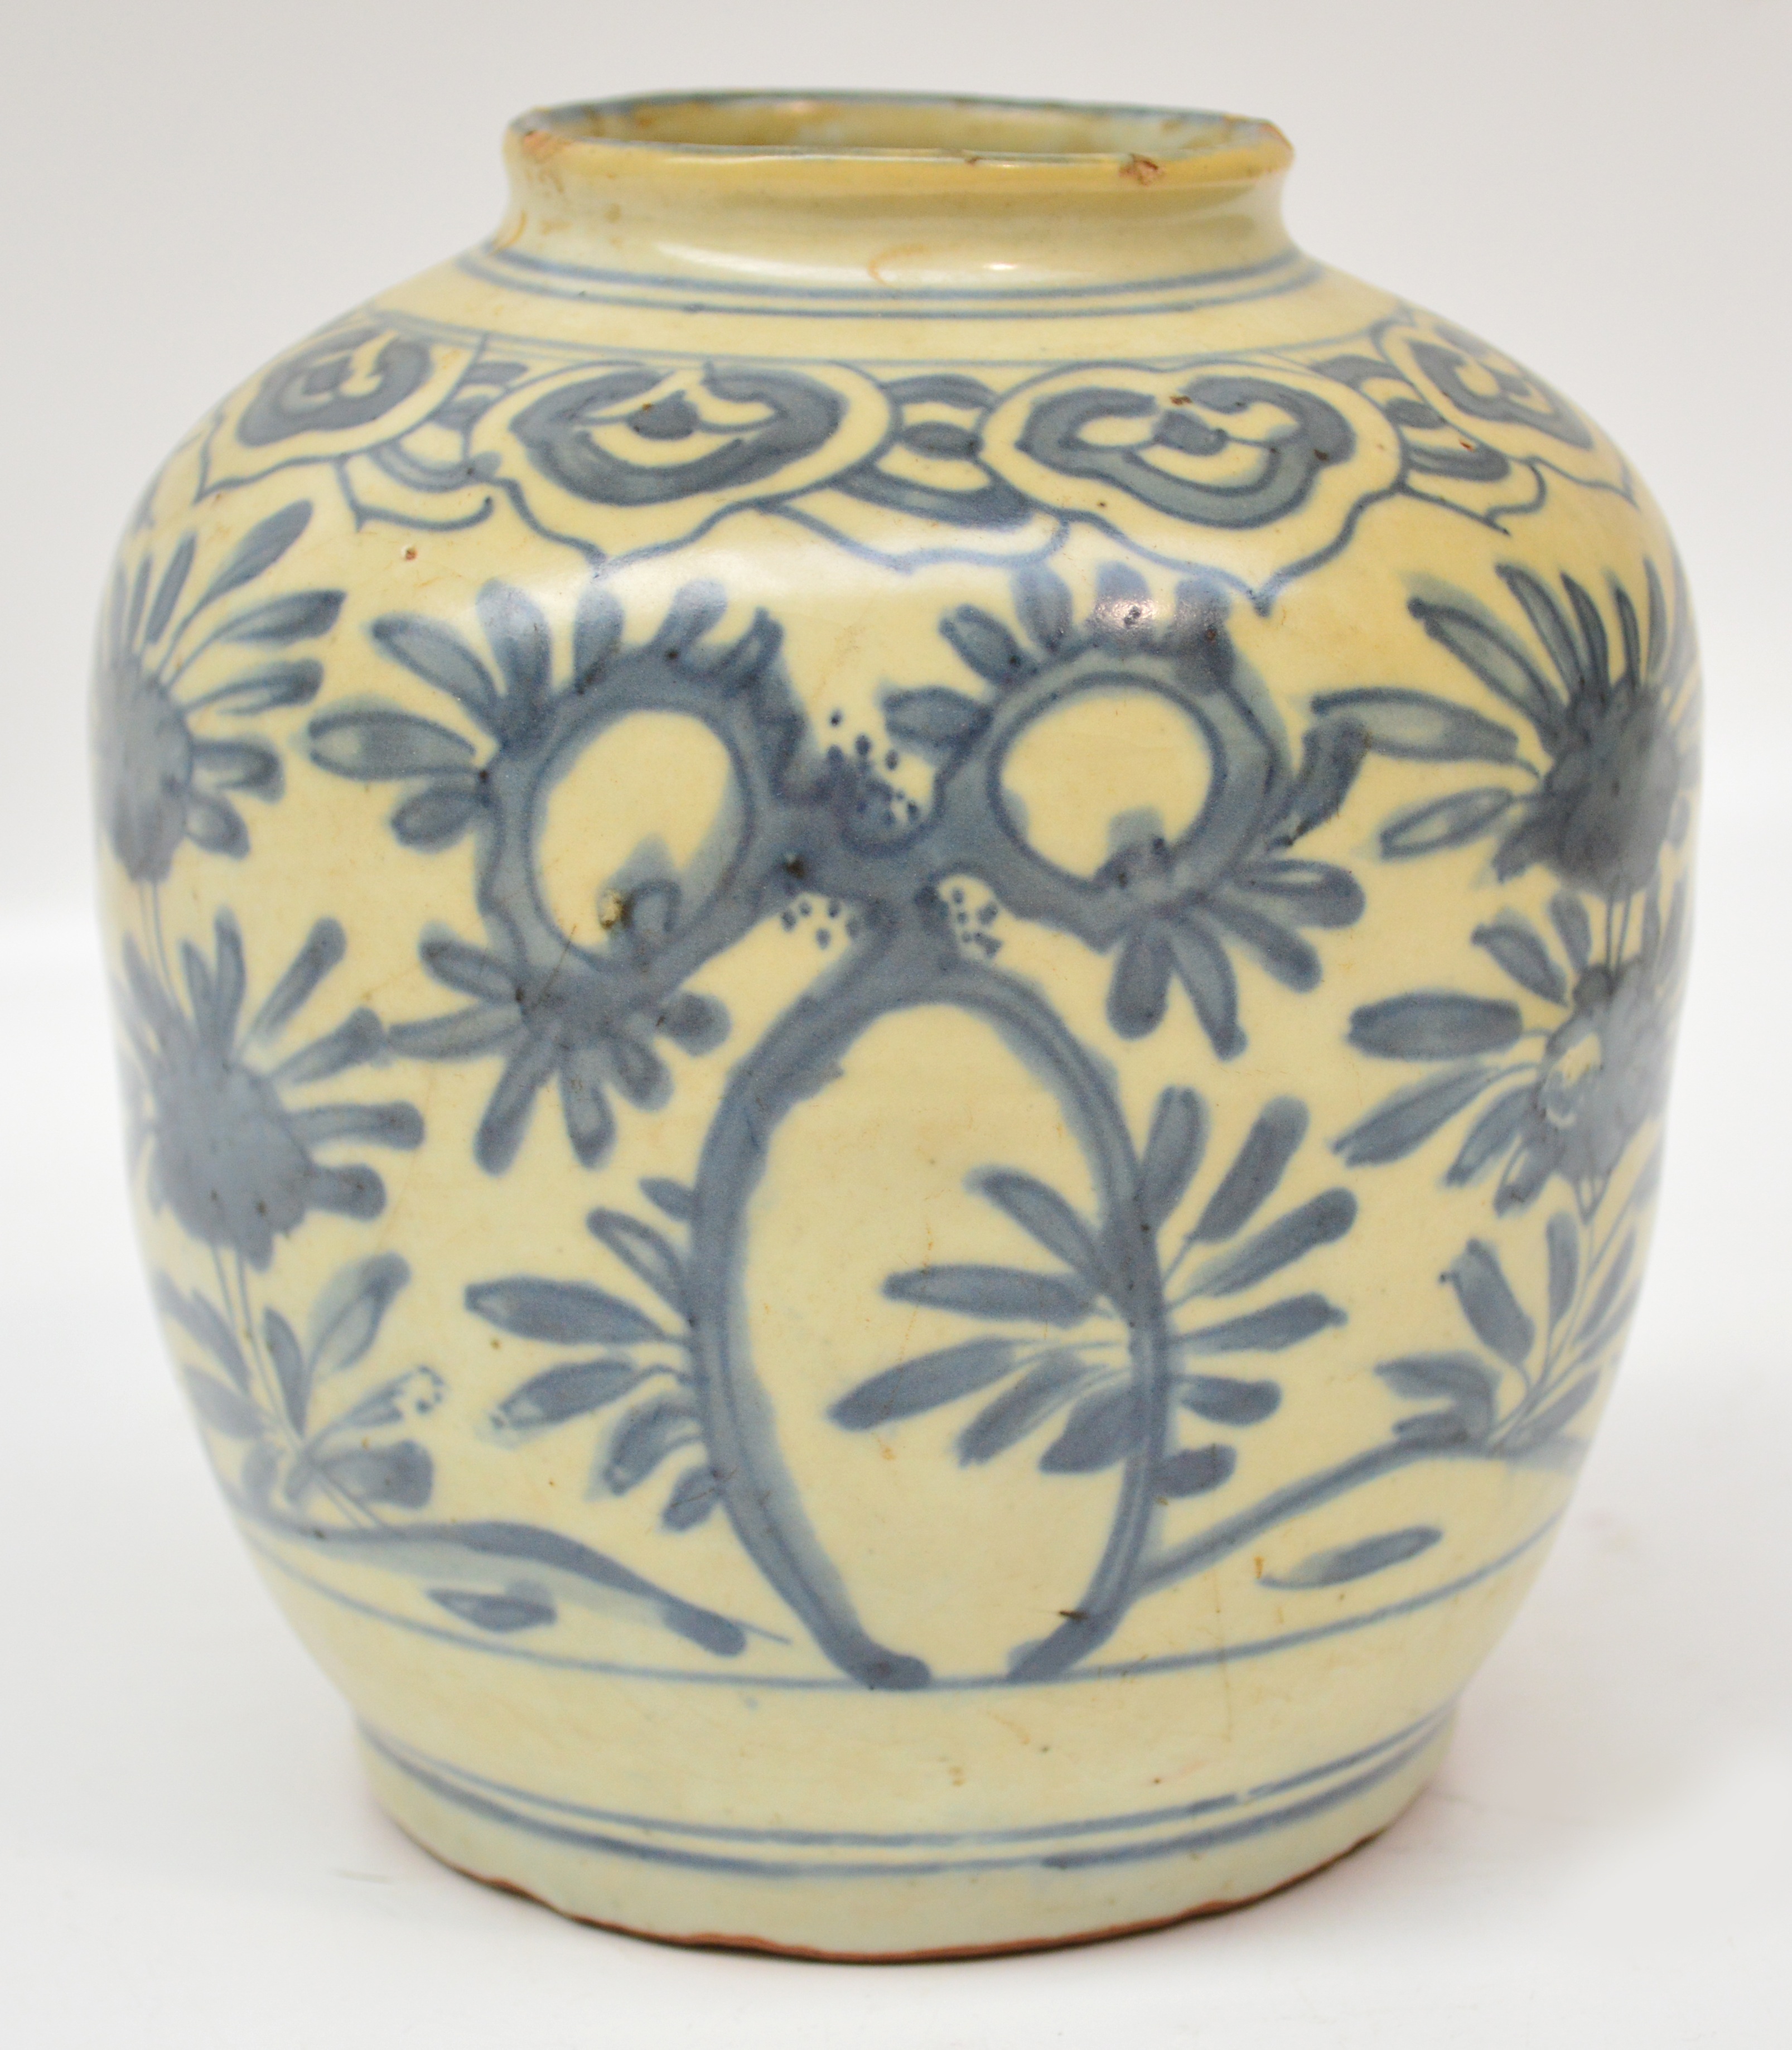 A 16th century Chinese porcelain jar painted in underglaze blue with chrysanthemum sprays, height